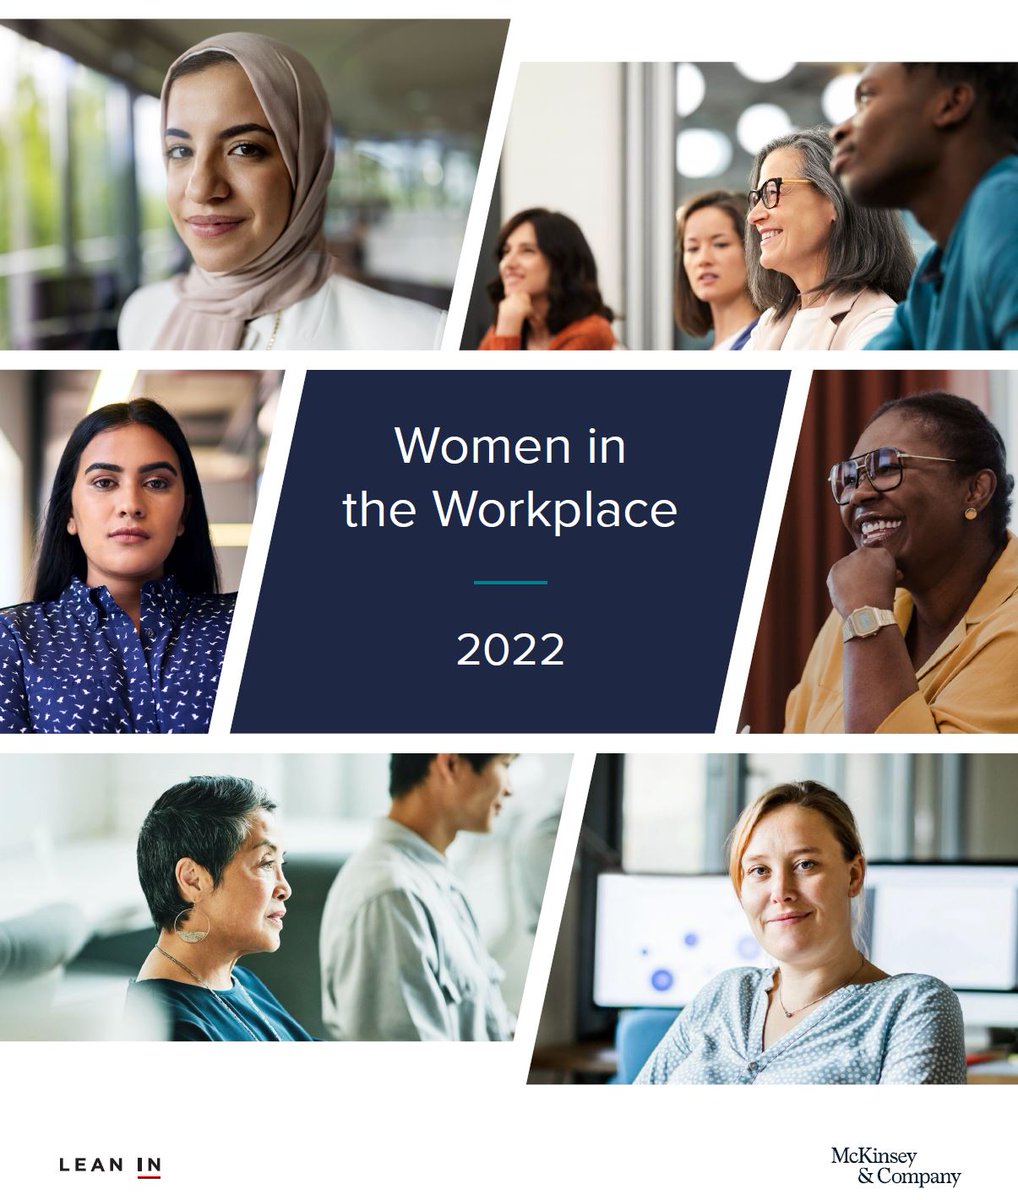 “Managers play an essential role in shaping women’s—and all employees’—work experiences. When managers invest in people management and DEI, women are happier and less burned out'

Download report: womenintheworkplace.com
 
#diversity #inclusion  #wellbeing #preventburnout #women